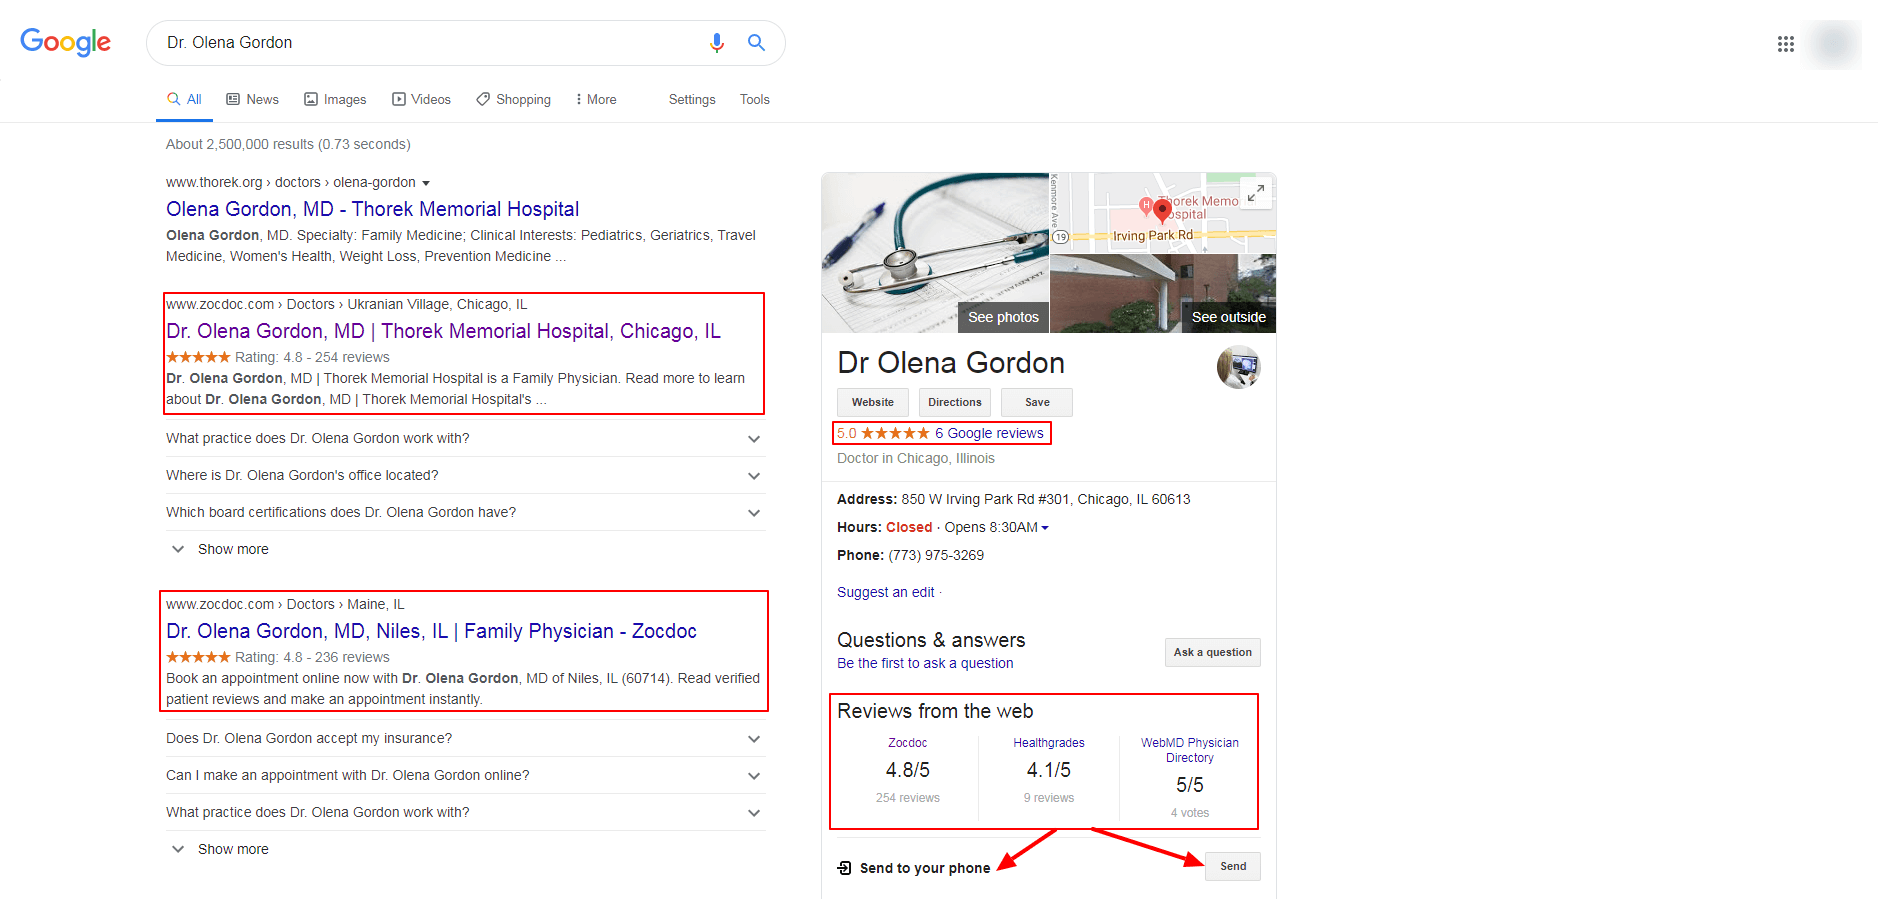 zocdoc on google results page